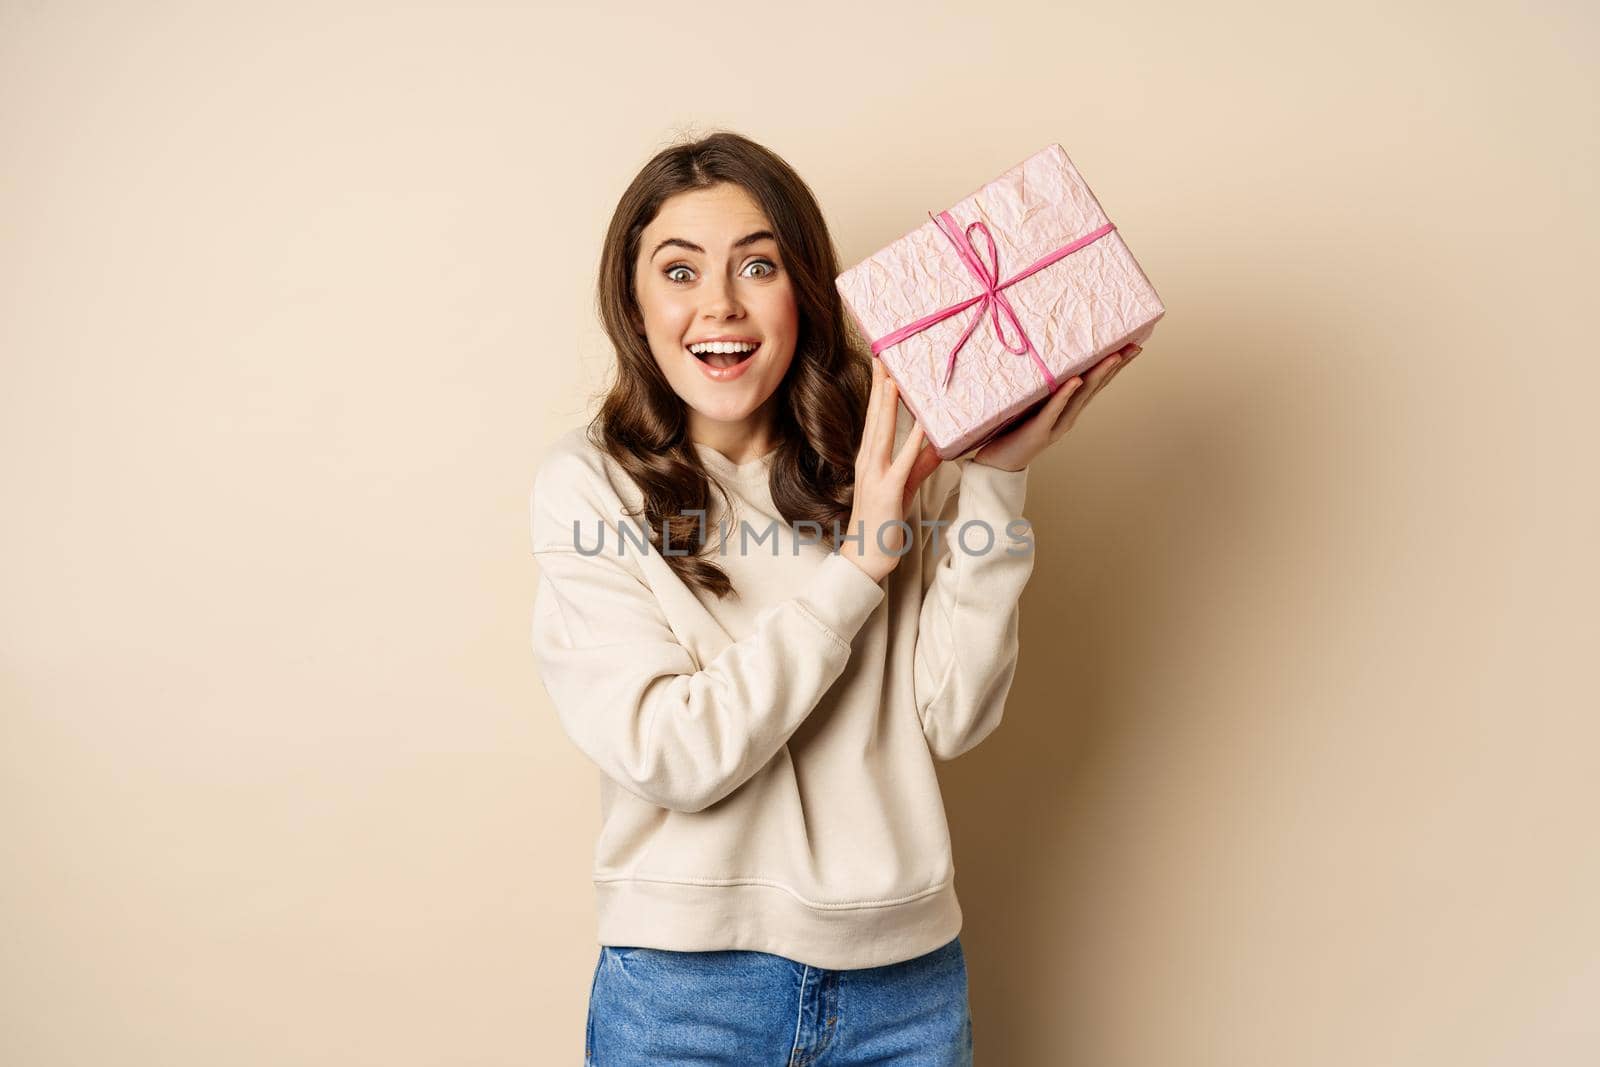 Excited cute girl shaking box with gift, guessing whats inside present, standing happy against beige background.